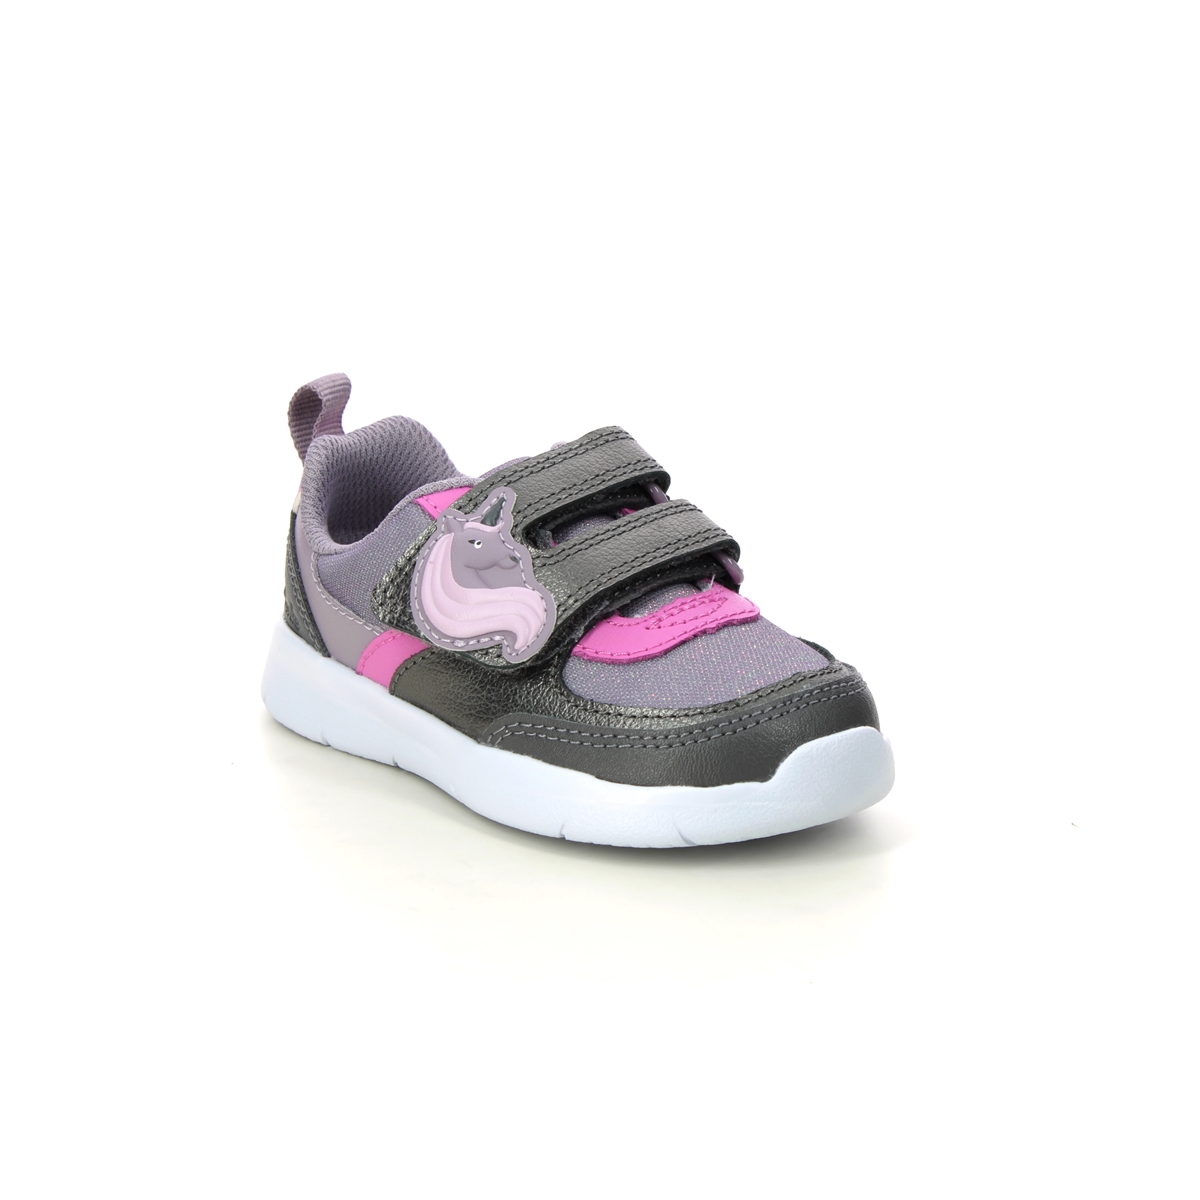 Clarks Ath Shimmer T Purple multi Kids toddler girls trainers 7645-86F in a Plain Leather and Textile in Size 4.5